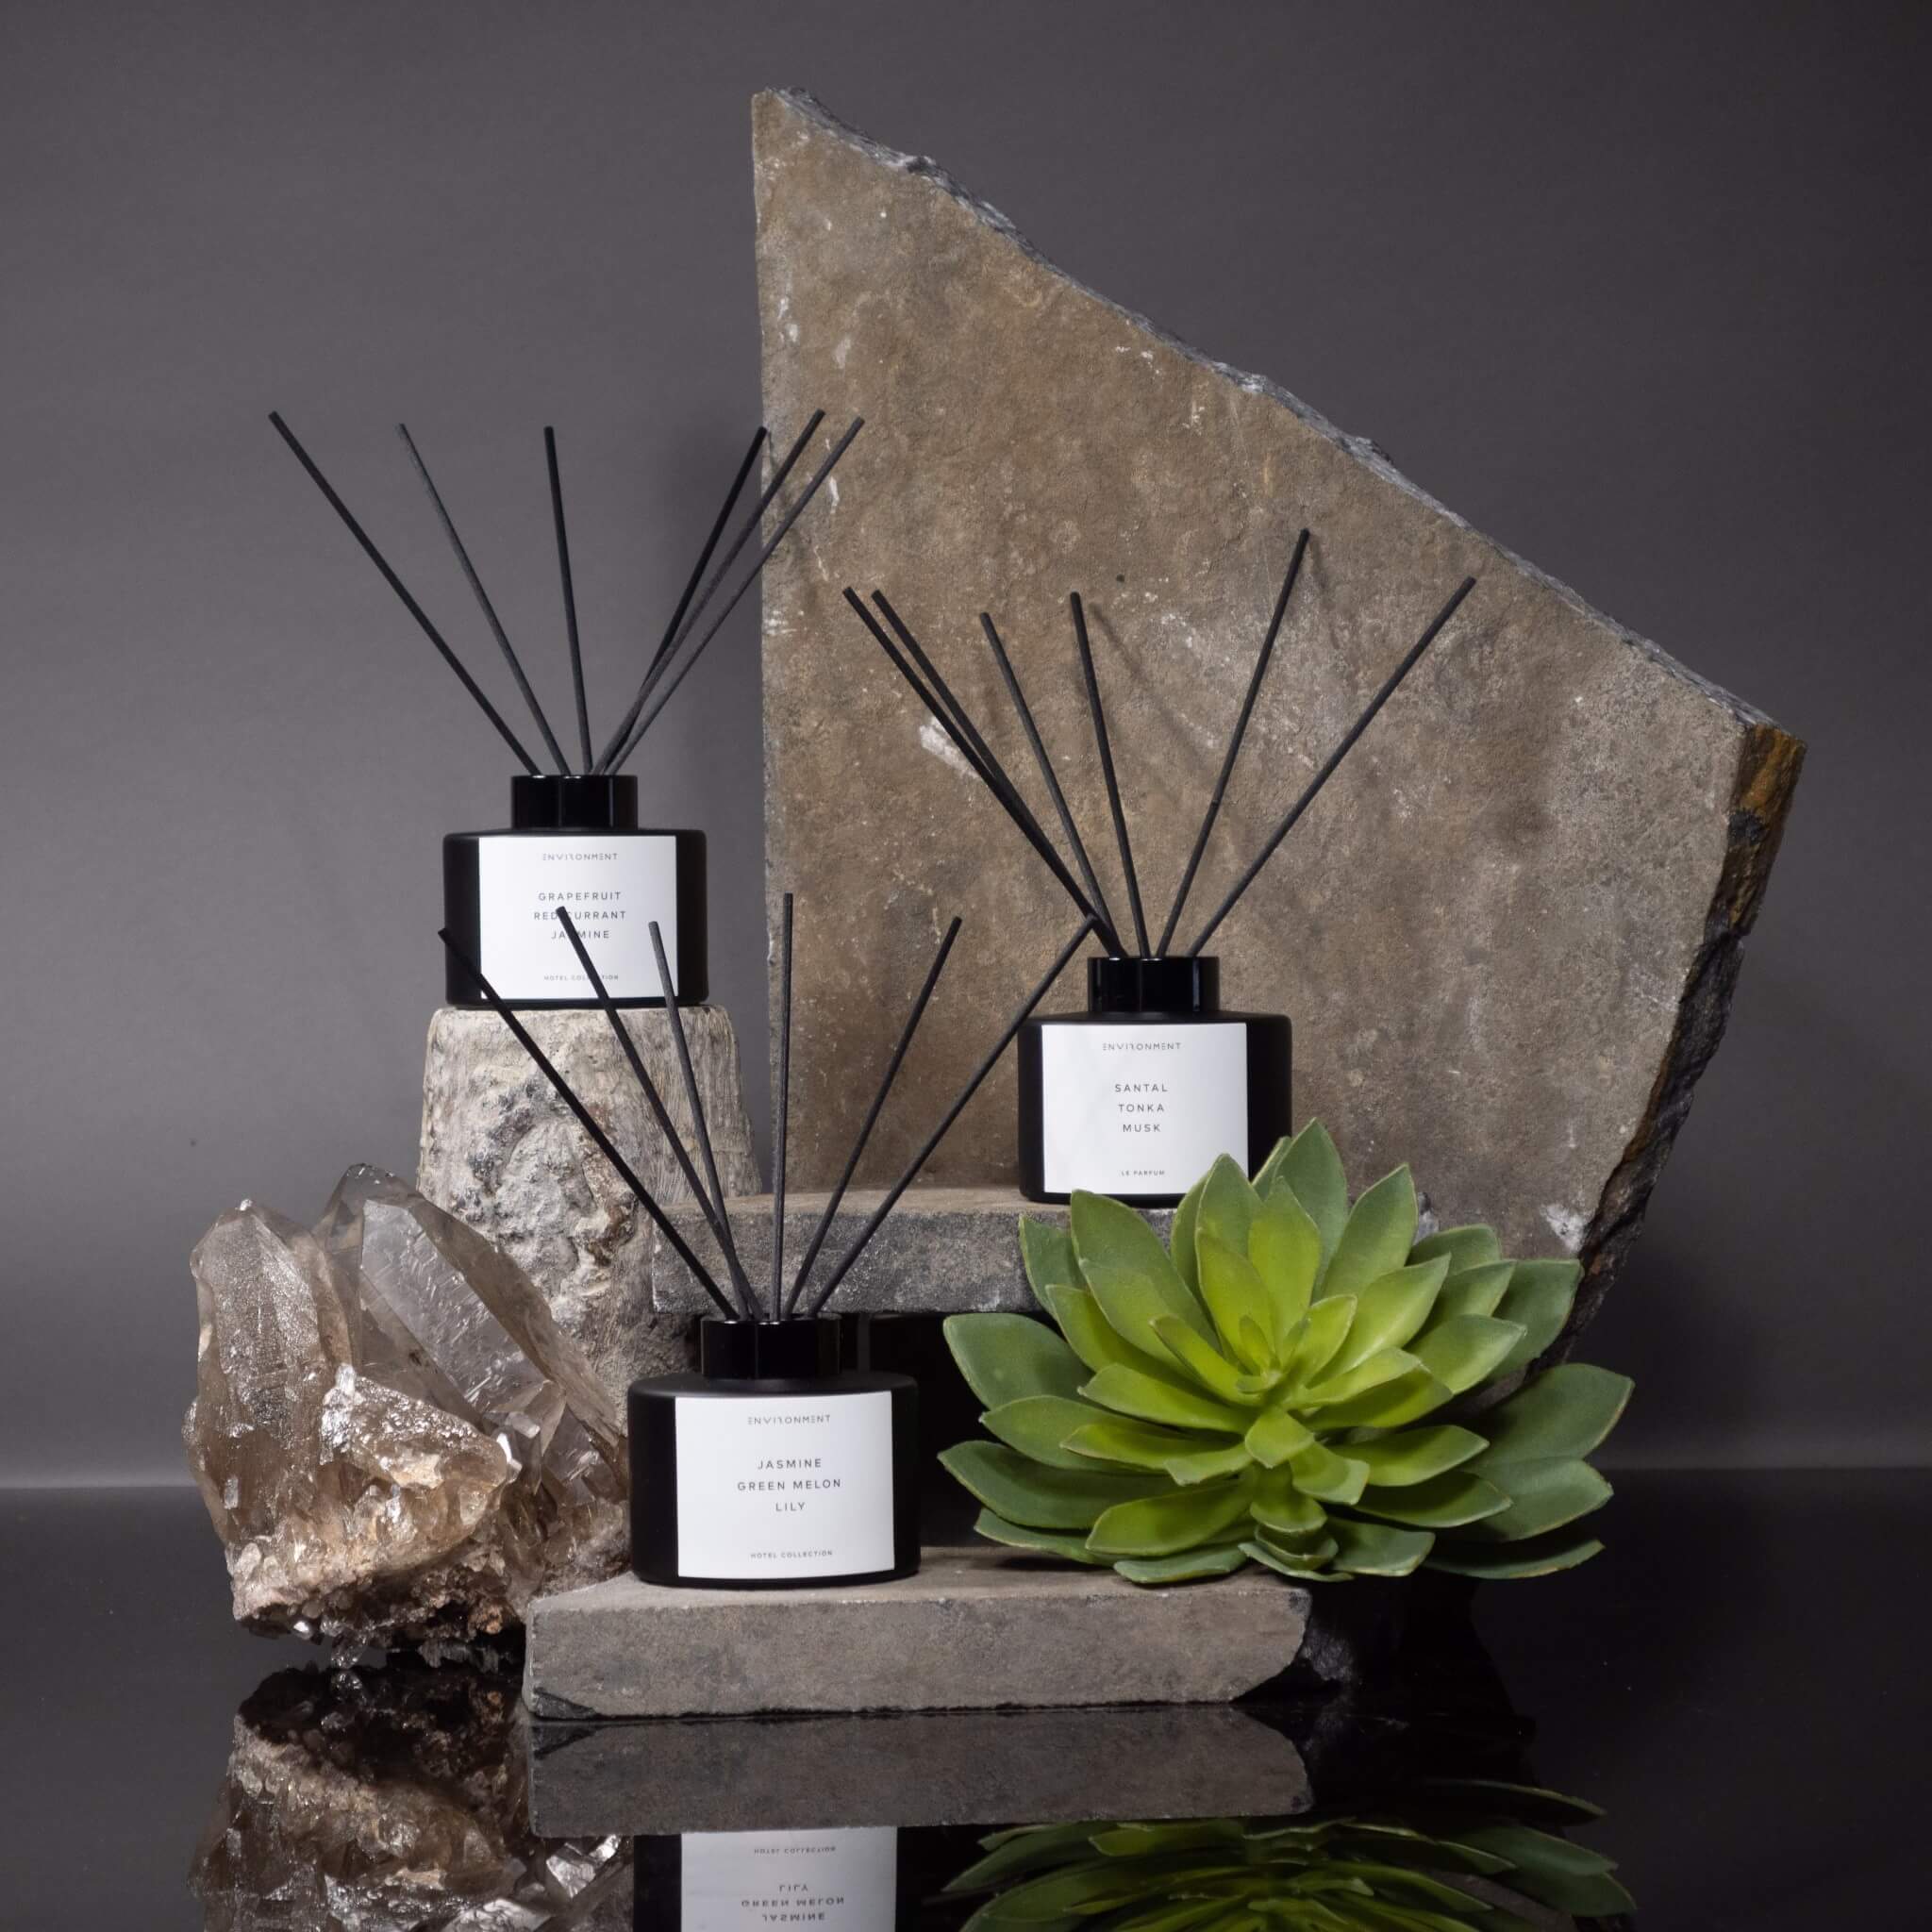 Sandalwood | Vanilla | Amber Diffuser (Inspired by Hotel Costes®)